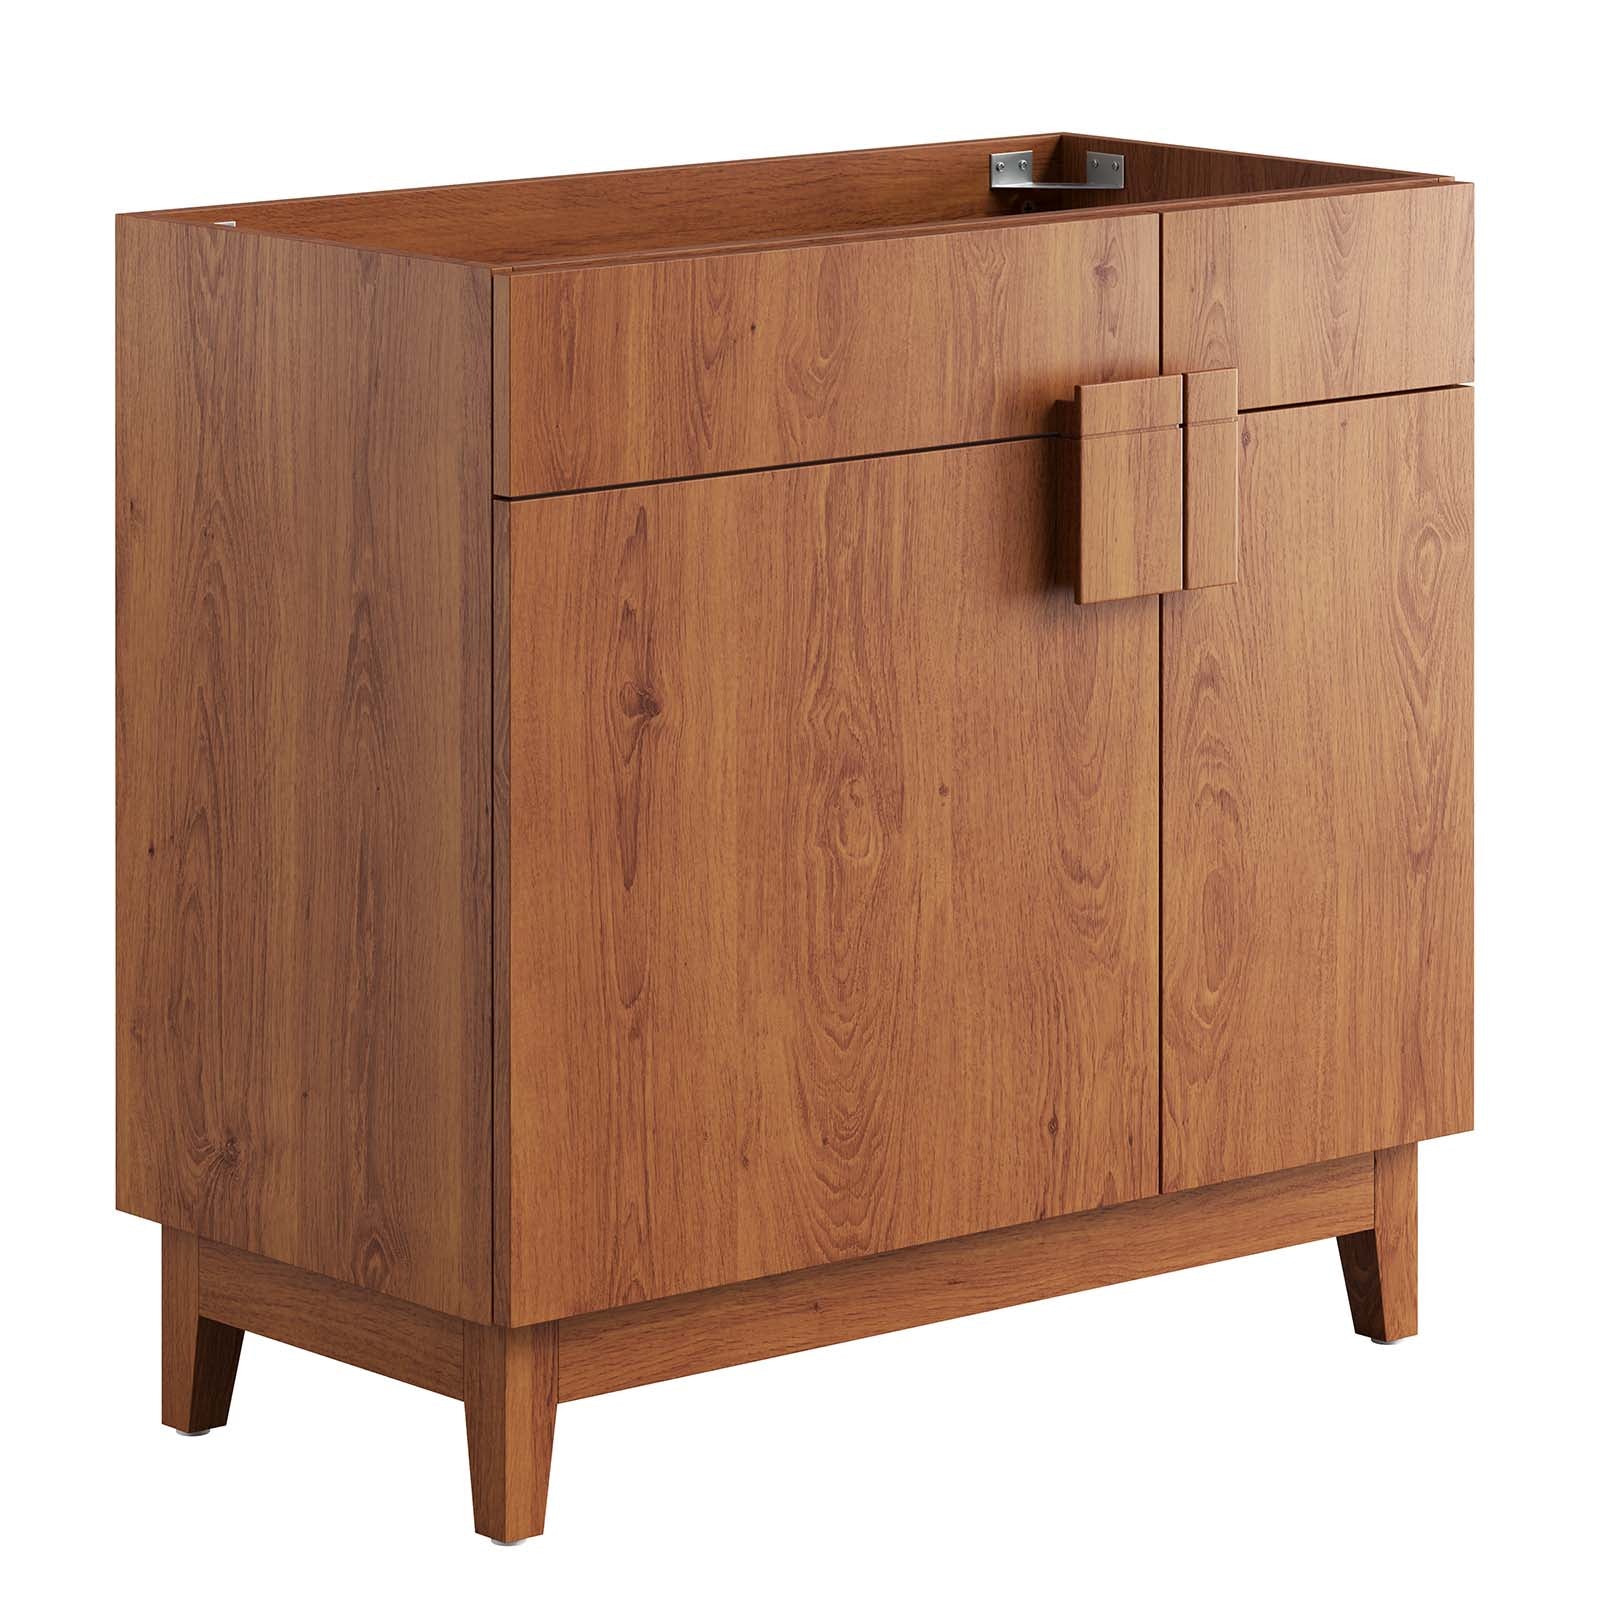 Miles 36” Bathroom Vanity Cabinet (Sink Basin Not Included) By Modway - EEI-6400 | Bathroom Accessories | Modway - 17